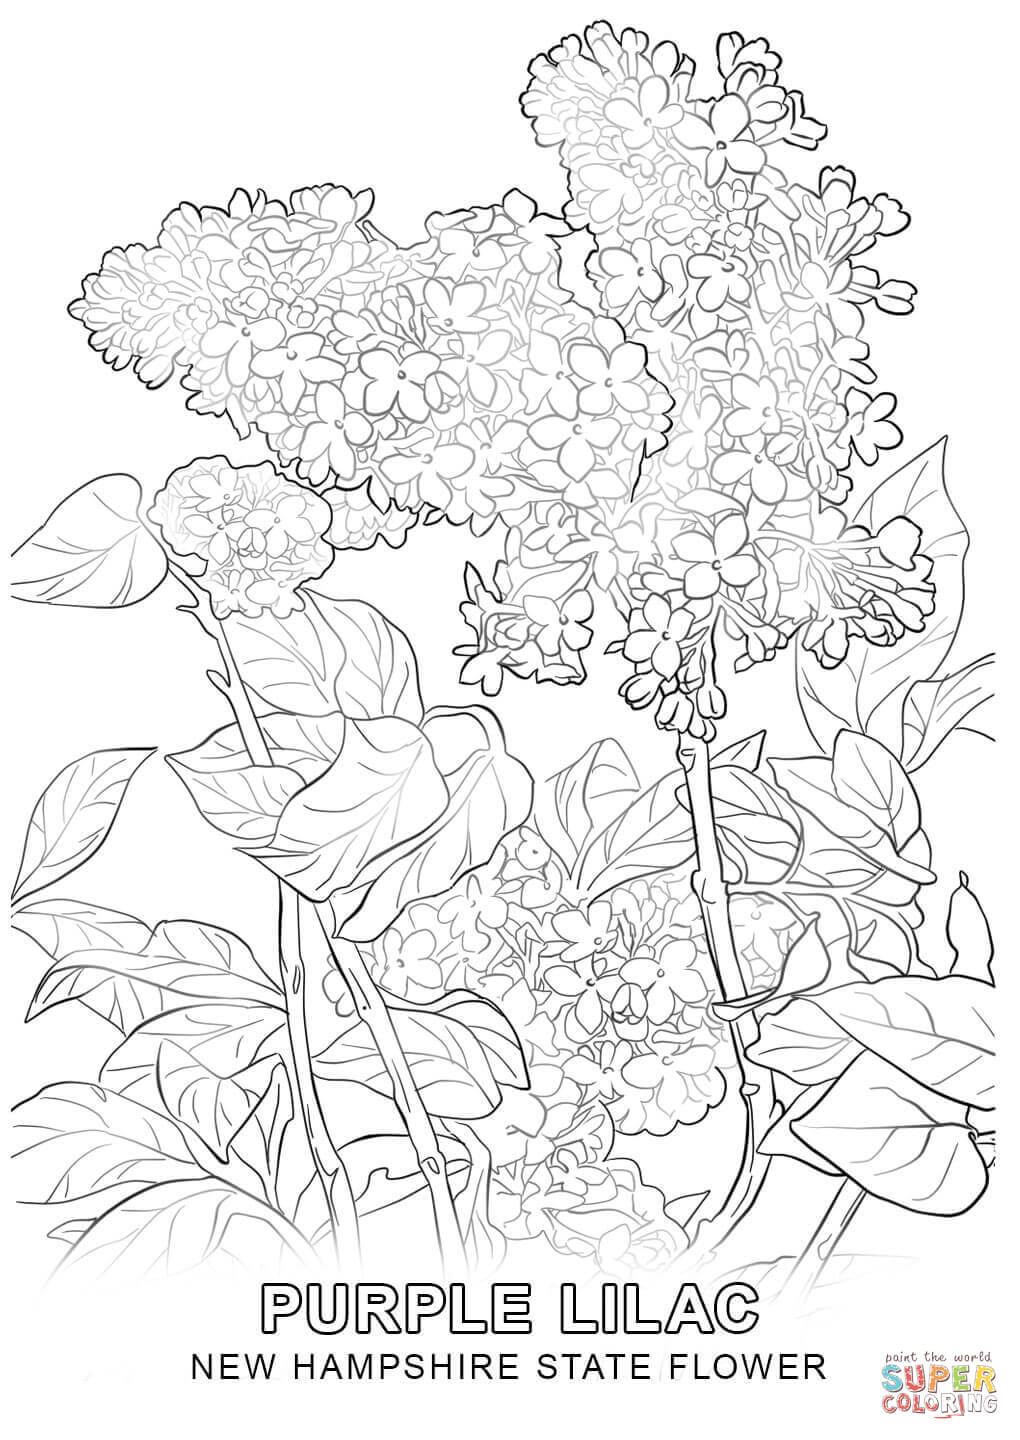 New Hampshire State Flower coloring page | Free Printable Coloring Pages